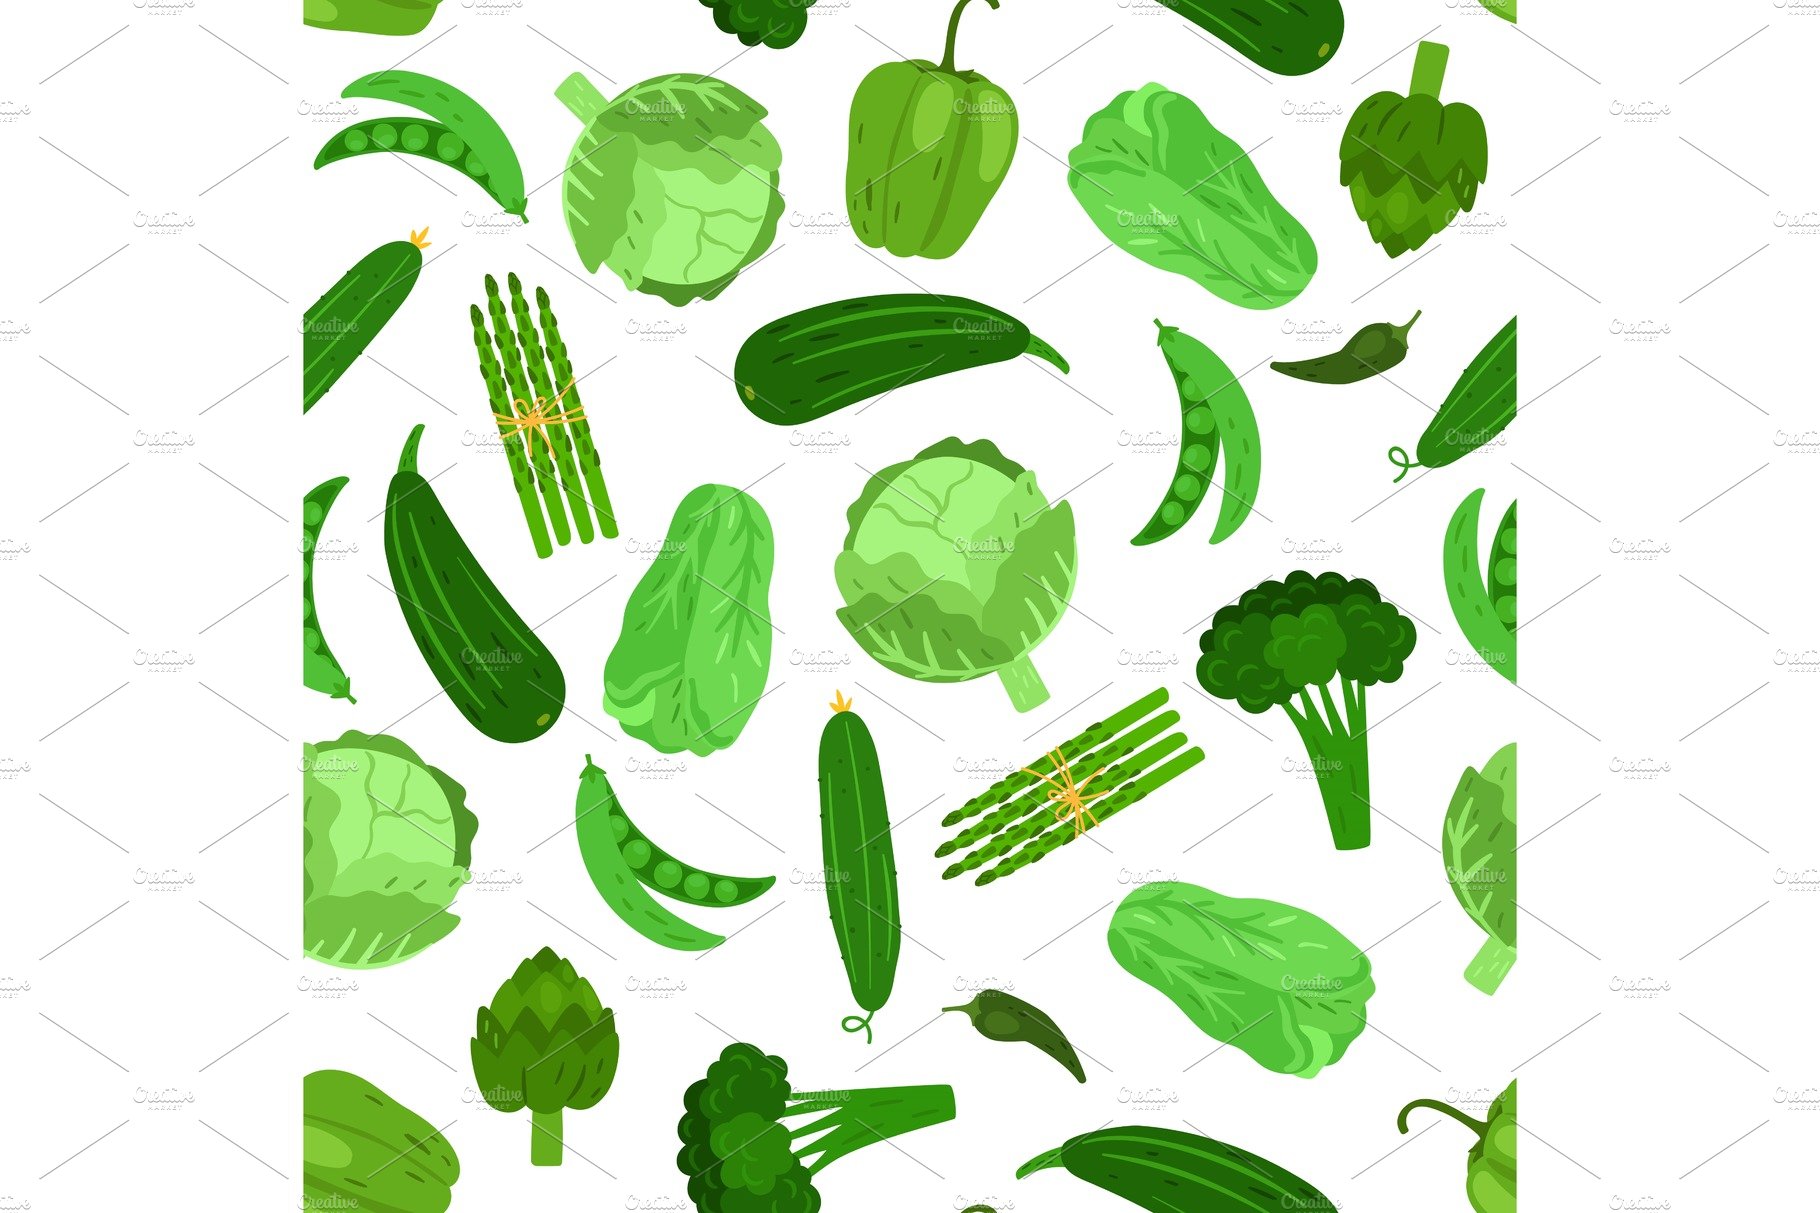 Green vegetables seamless pattern cover image.